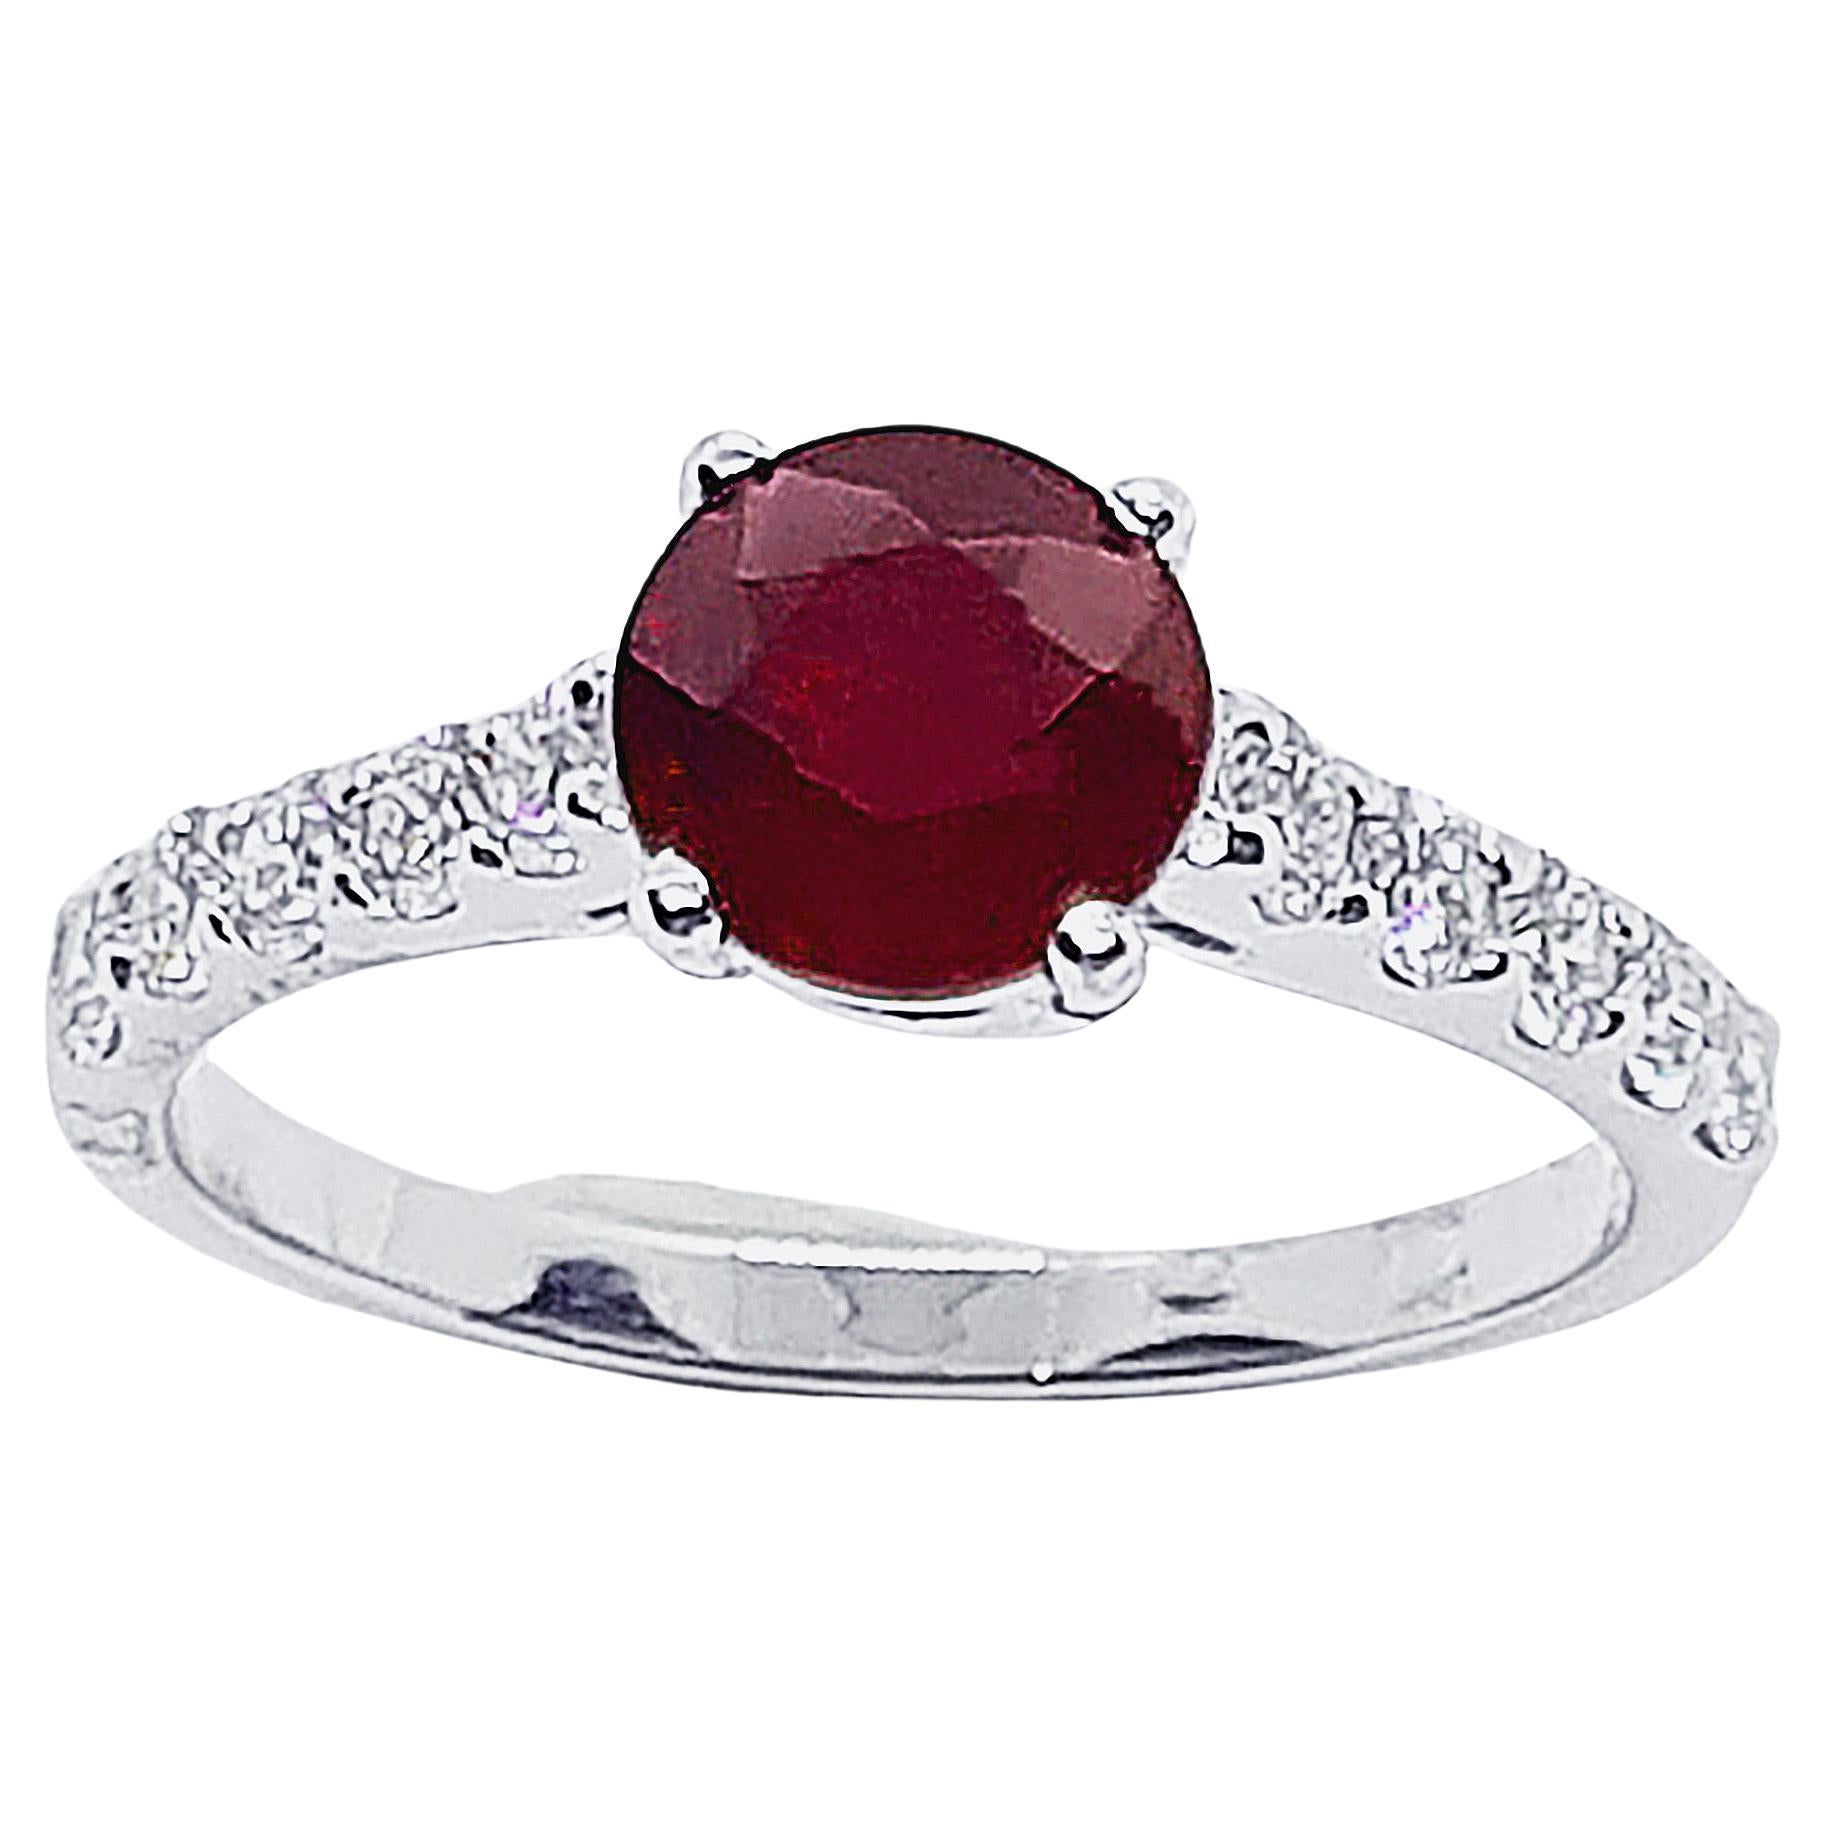 Round-cut ruby with Diamond Ring Set in 18 Karat White Gold Settings For Sale